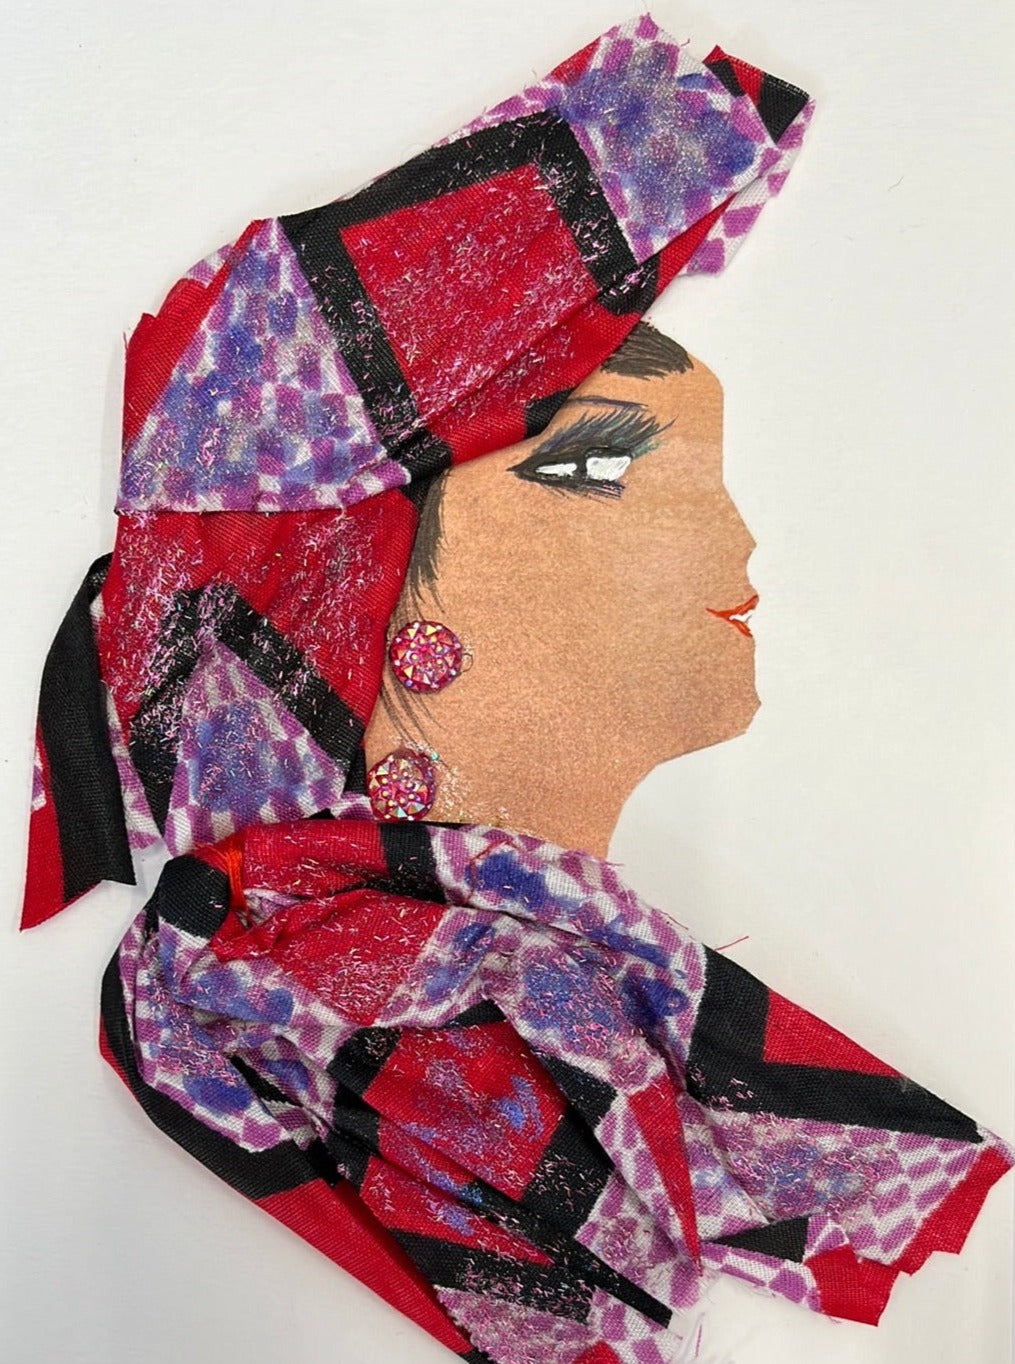 I designed this handmade card of a woman named Ruby Tuby. She has a white skin tone and wears a matching blouse and headdress, which has a red, purple, and black geometric pattern on it and glitter over the entire fabric. Her jewellery is two small red gems. 